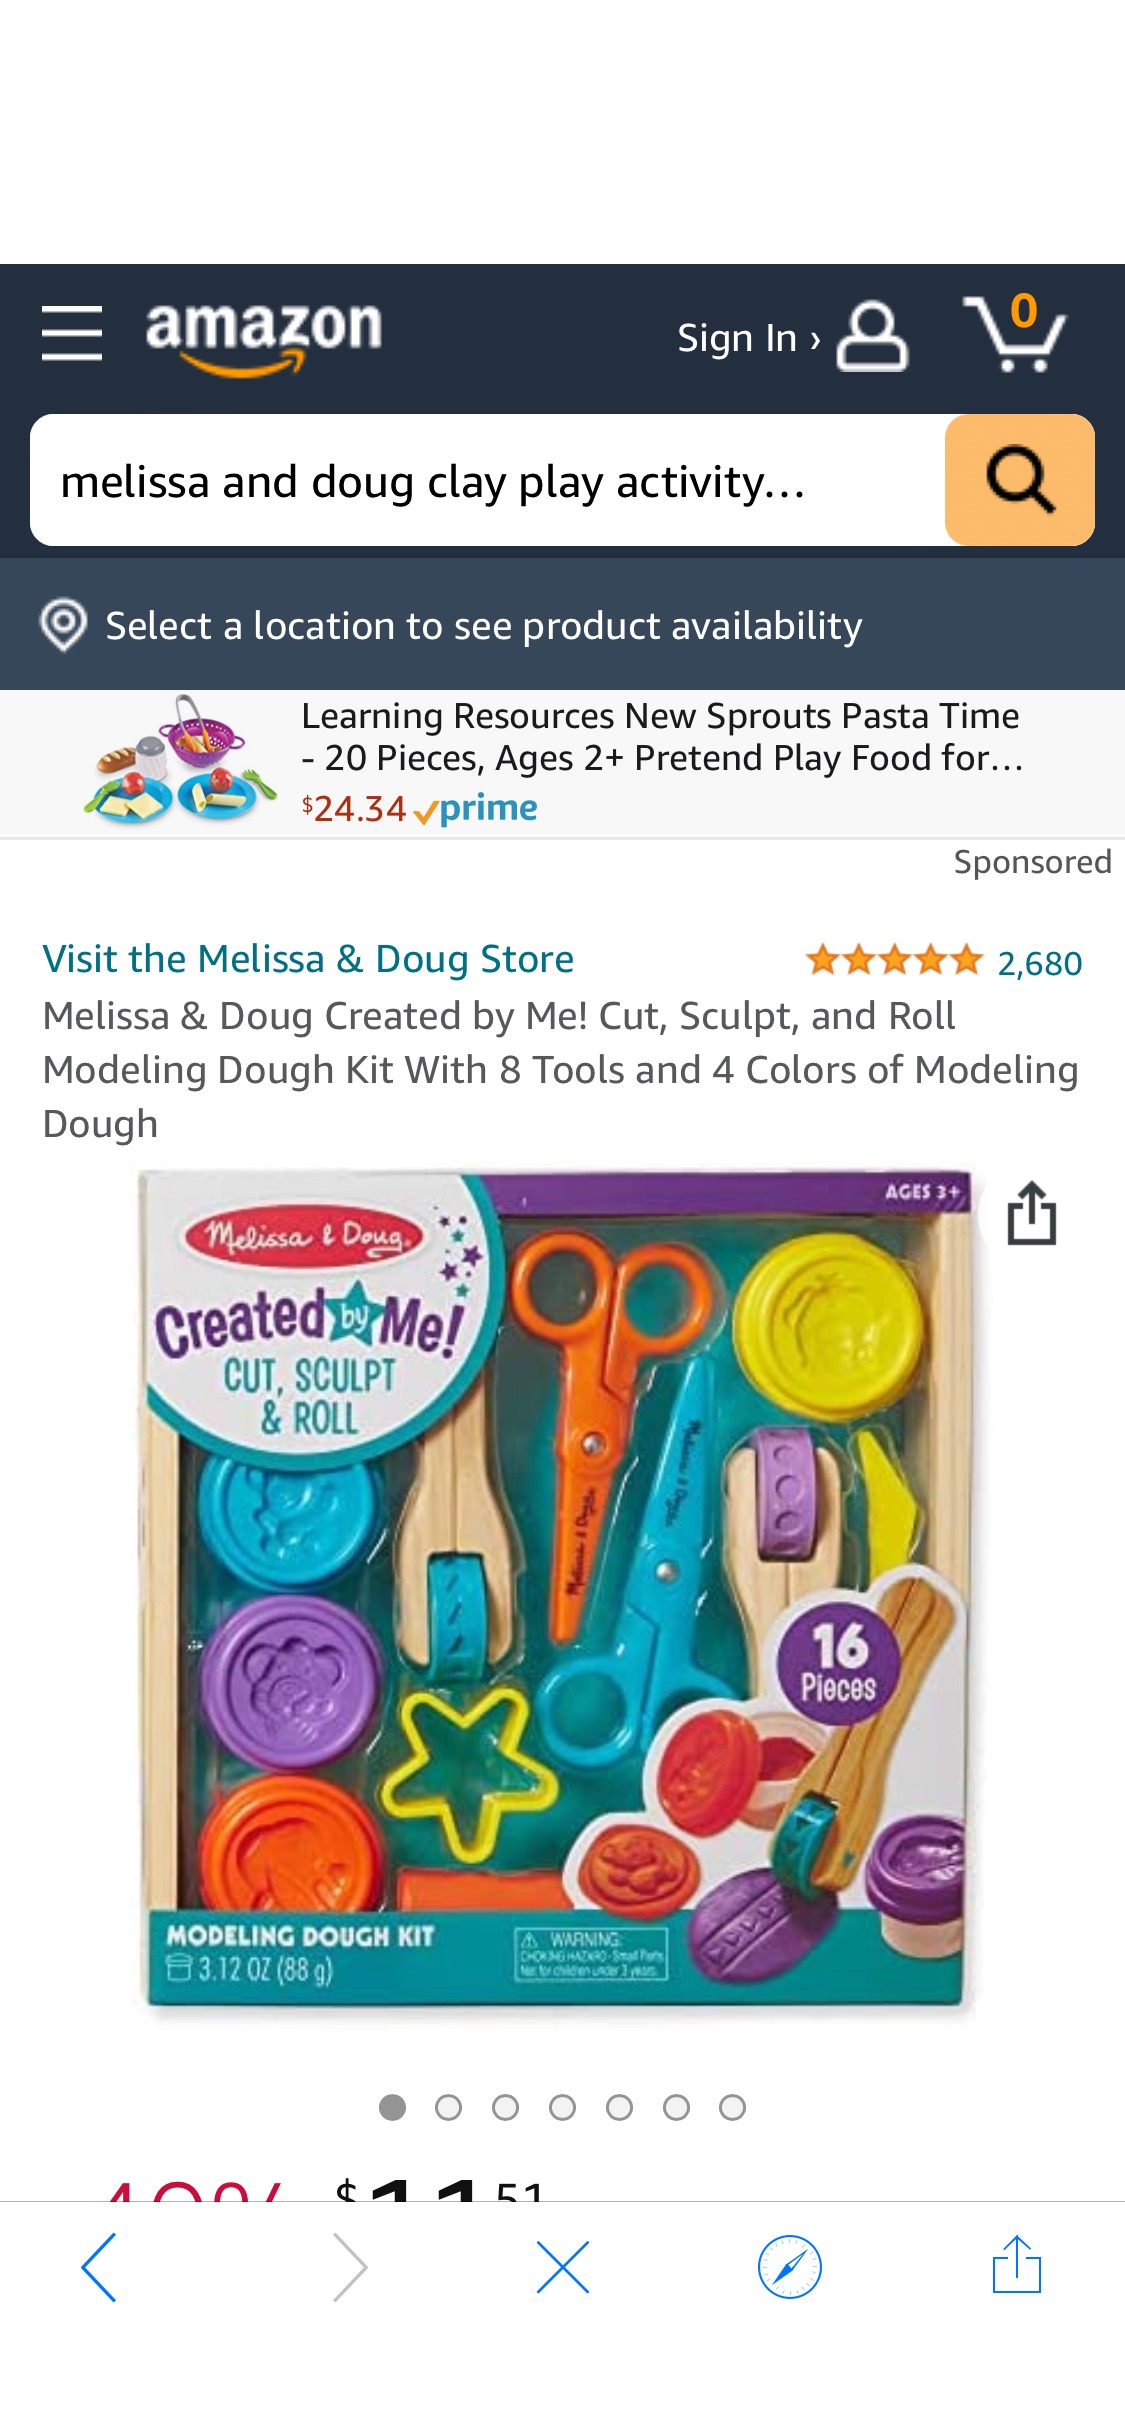 Amazon.com: Melissa & Doug Created by Me! Cut, Sculpt, and Roll Modeling Dough Kit With 8 Tools and 4 Colors of Modeling Dough : Melissa & Doug: Toys & Games